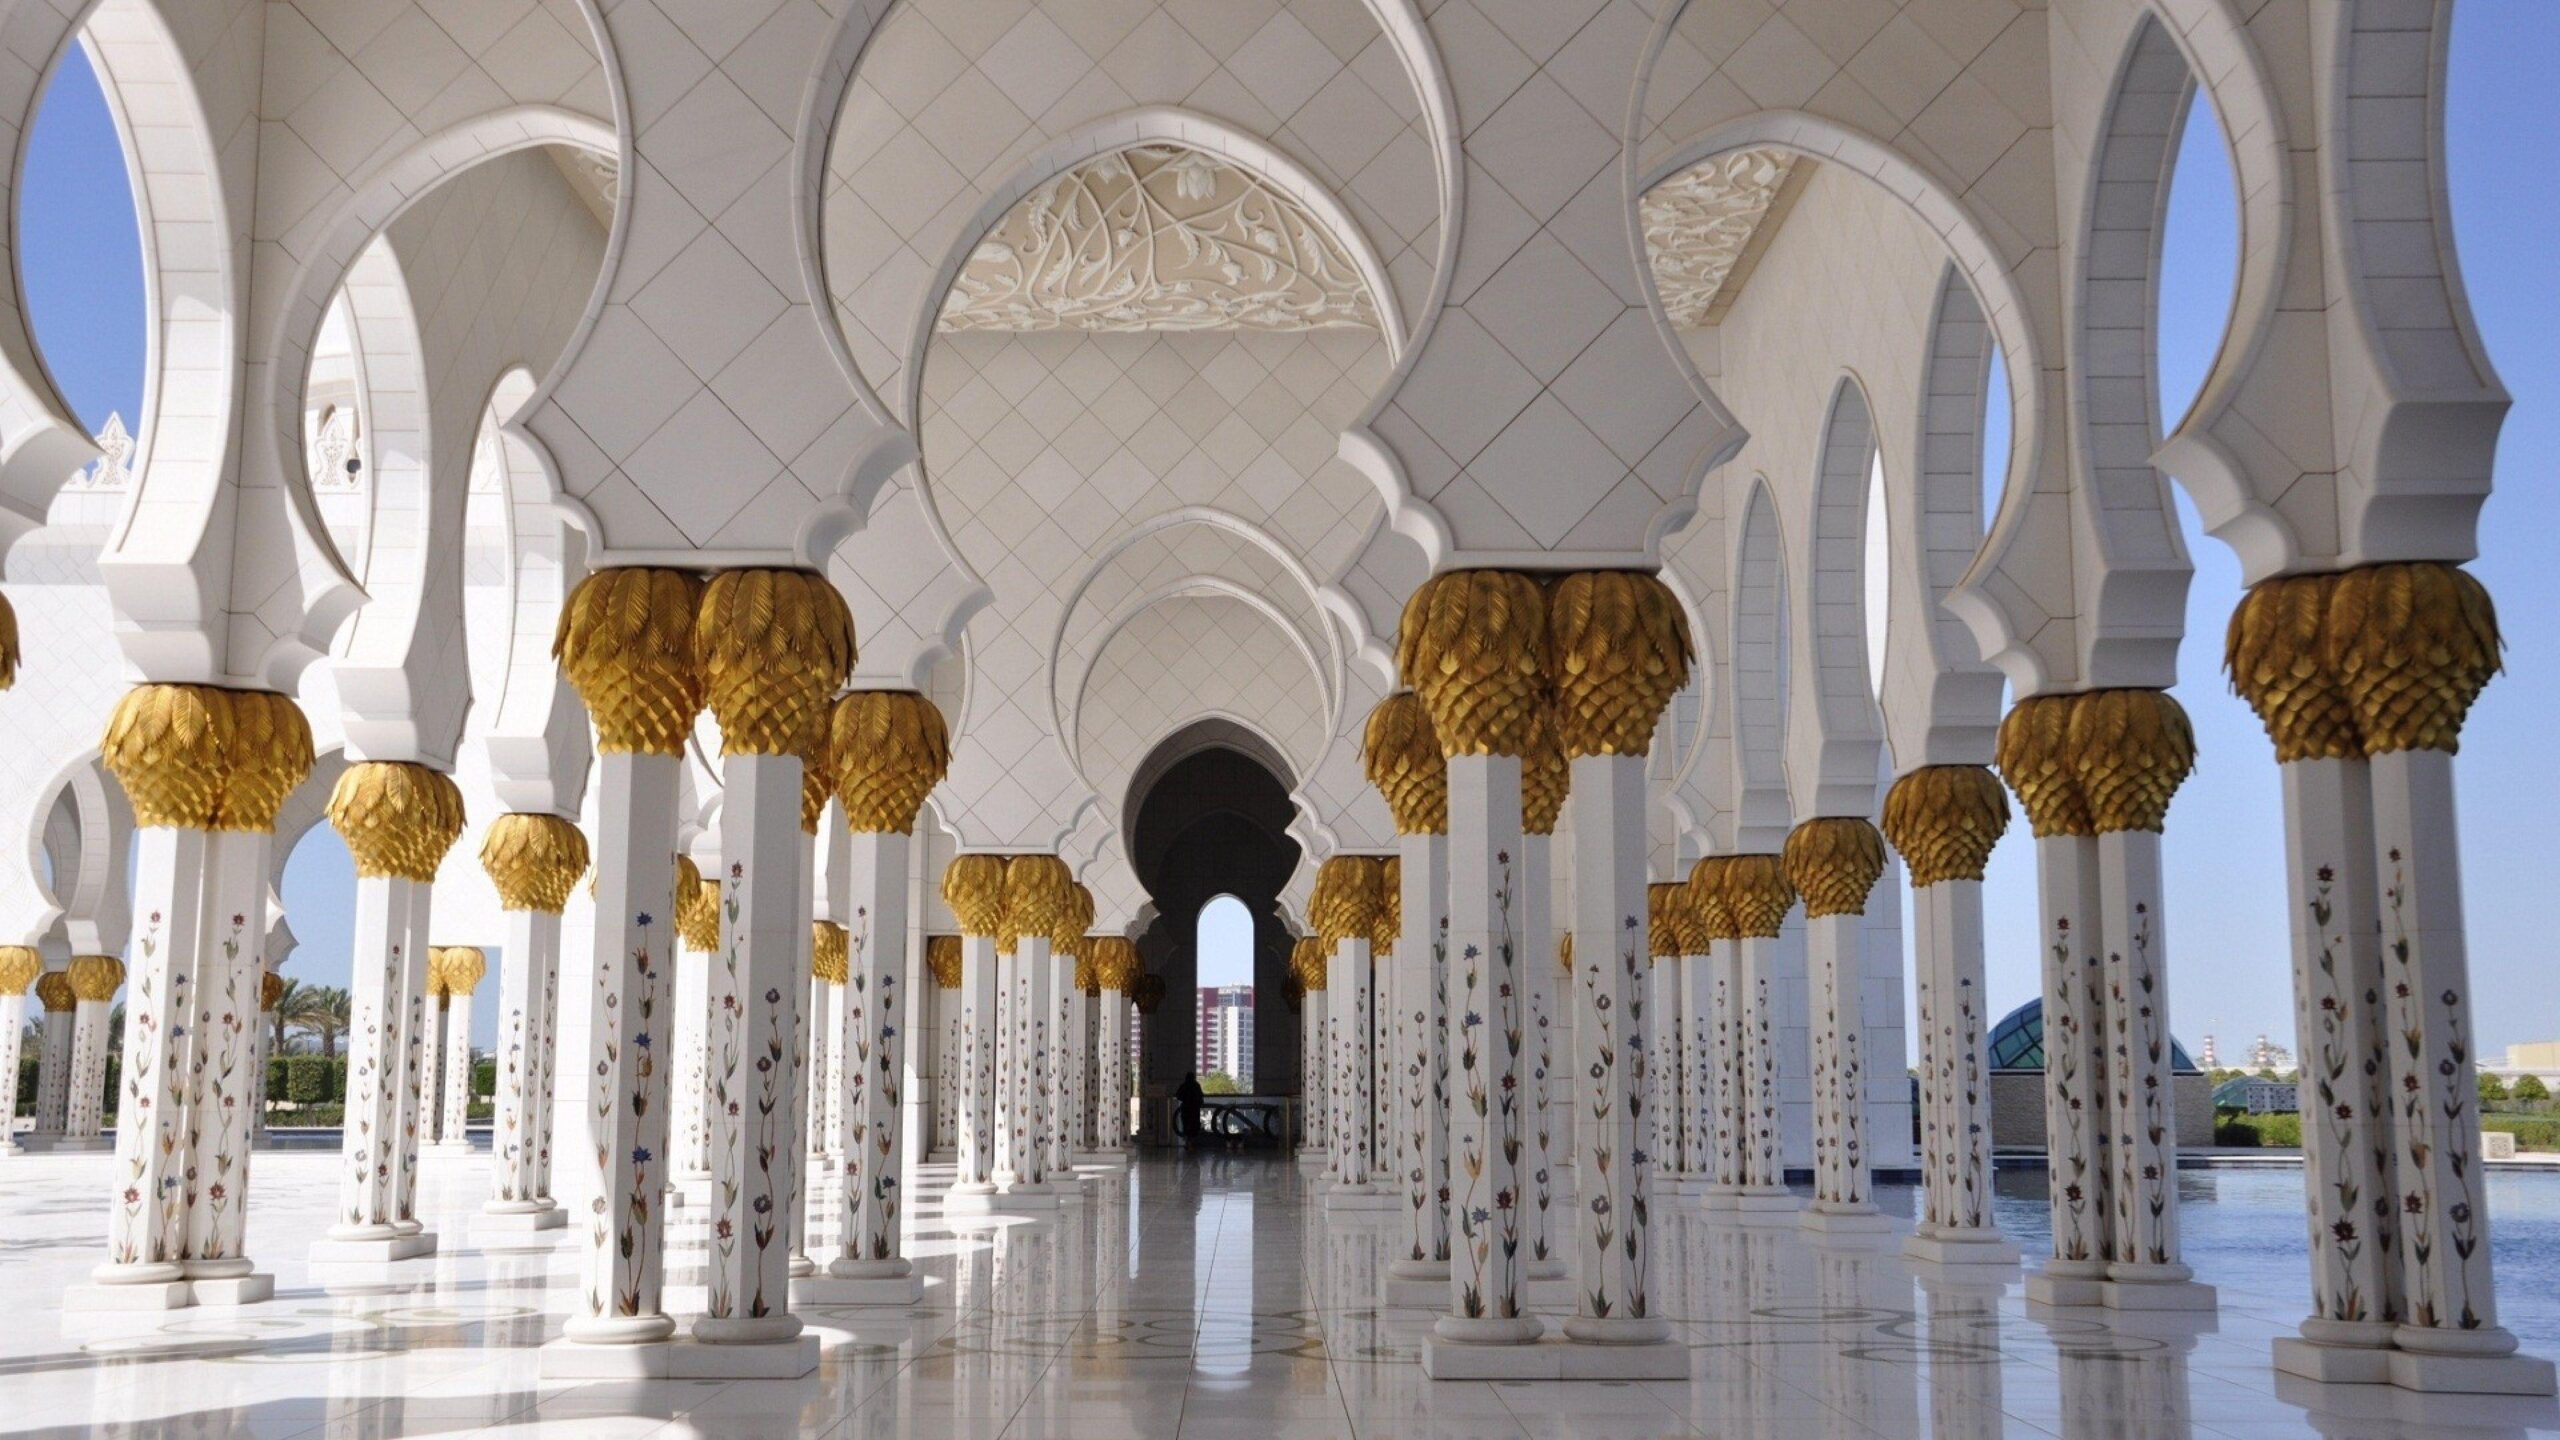 Download Wallpapers Sheikh zayed mosque, Abu dhabi